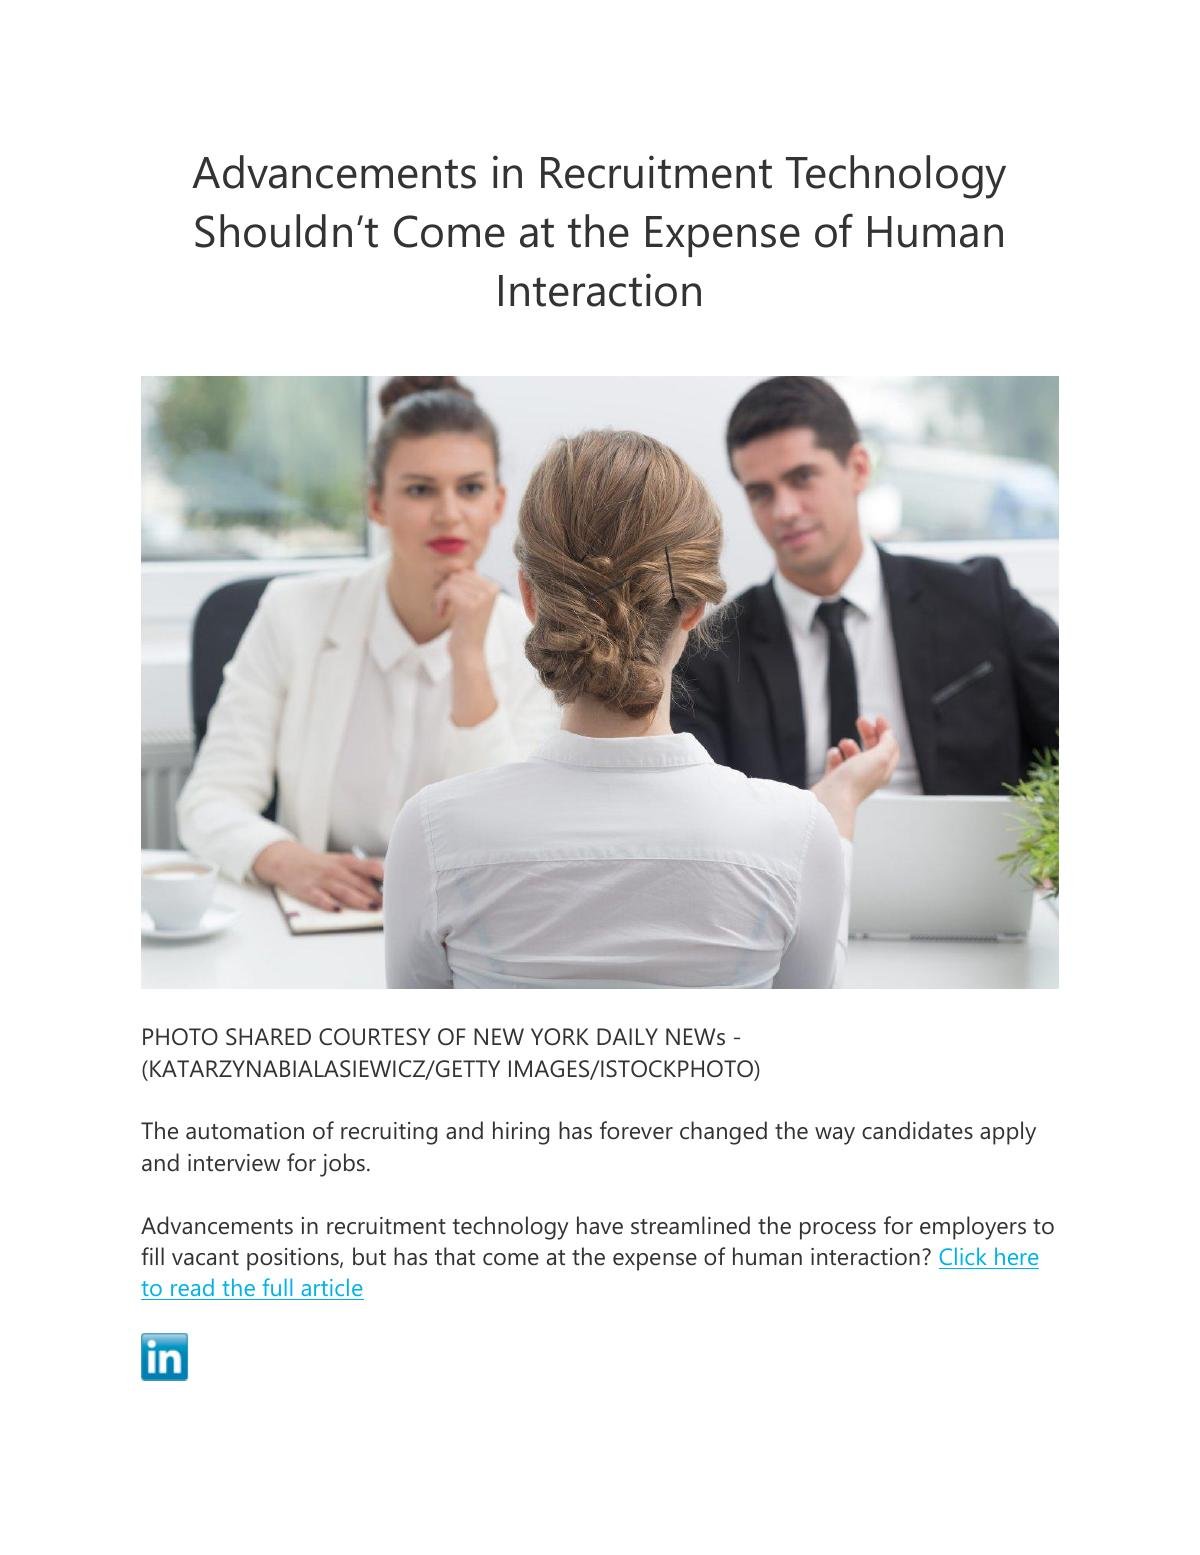 Advancements in Recruitment Technology Shouldn’t Come at the Expense of Human Interaction